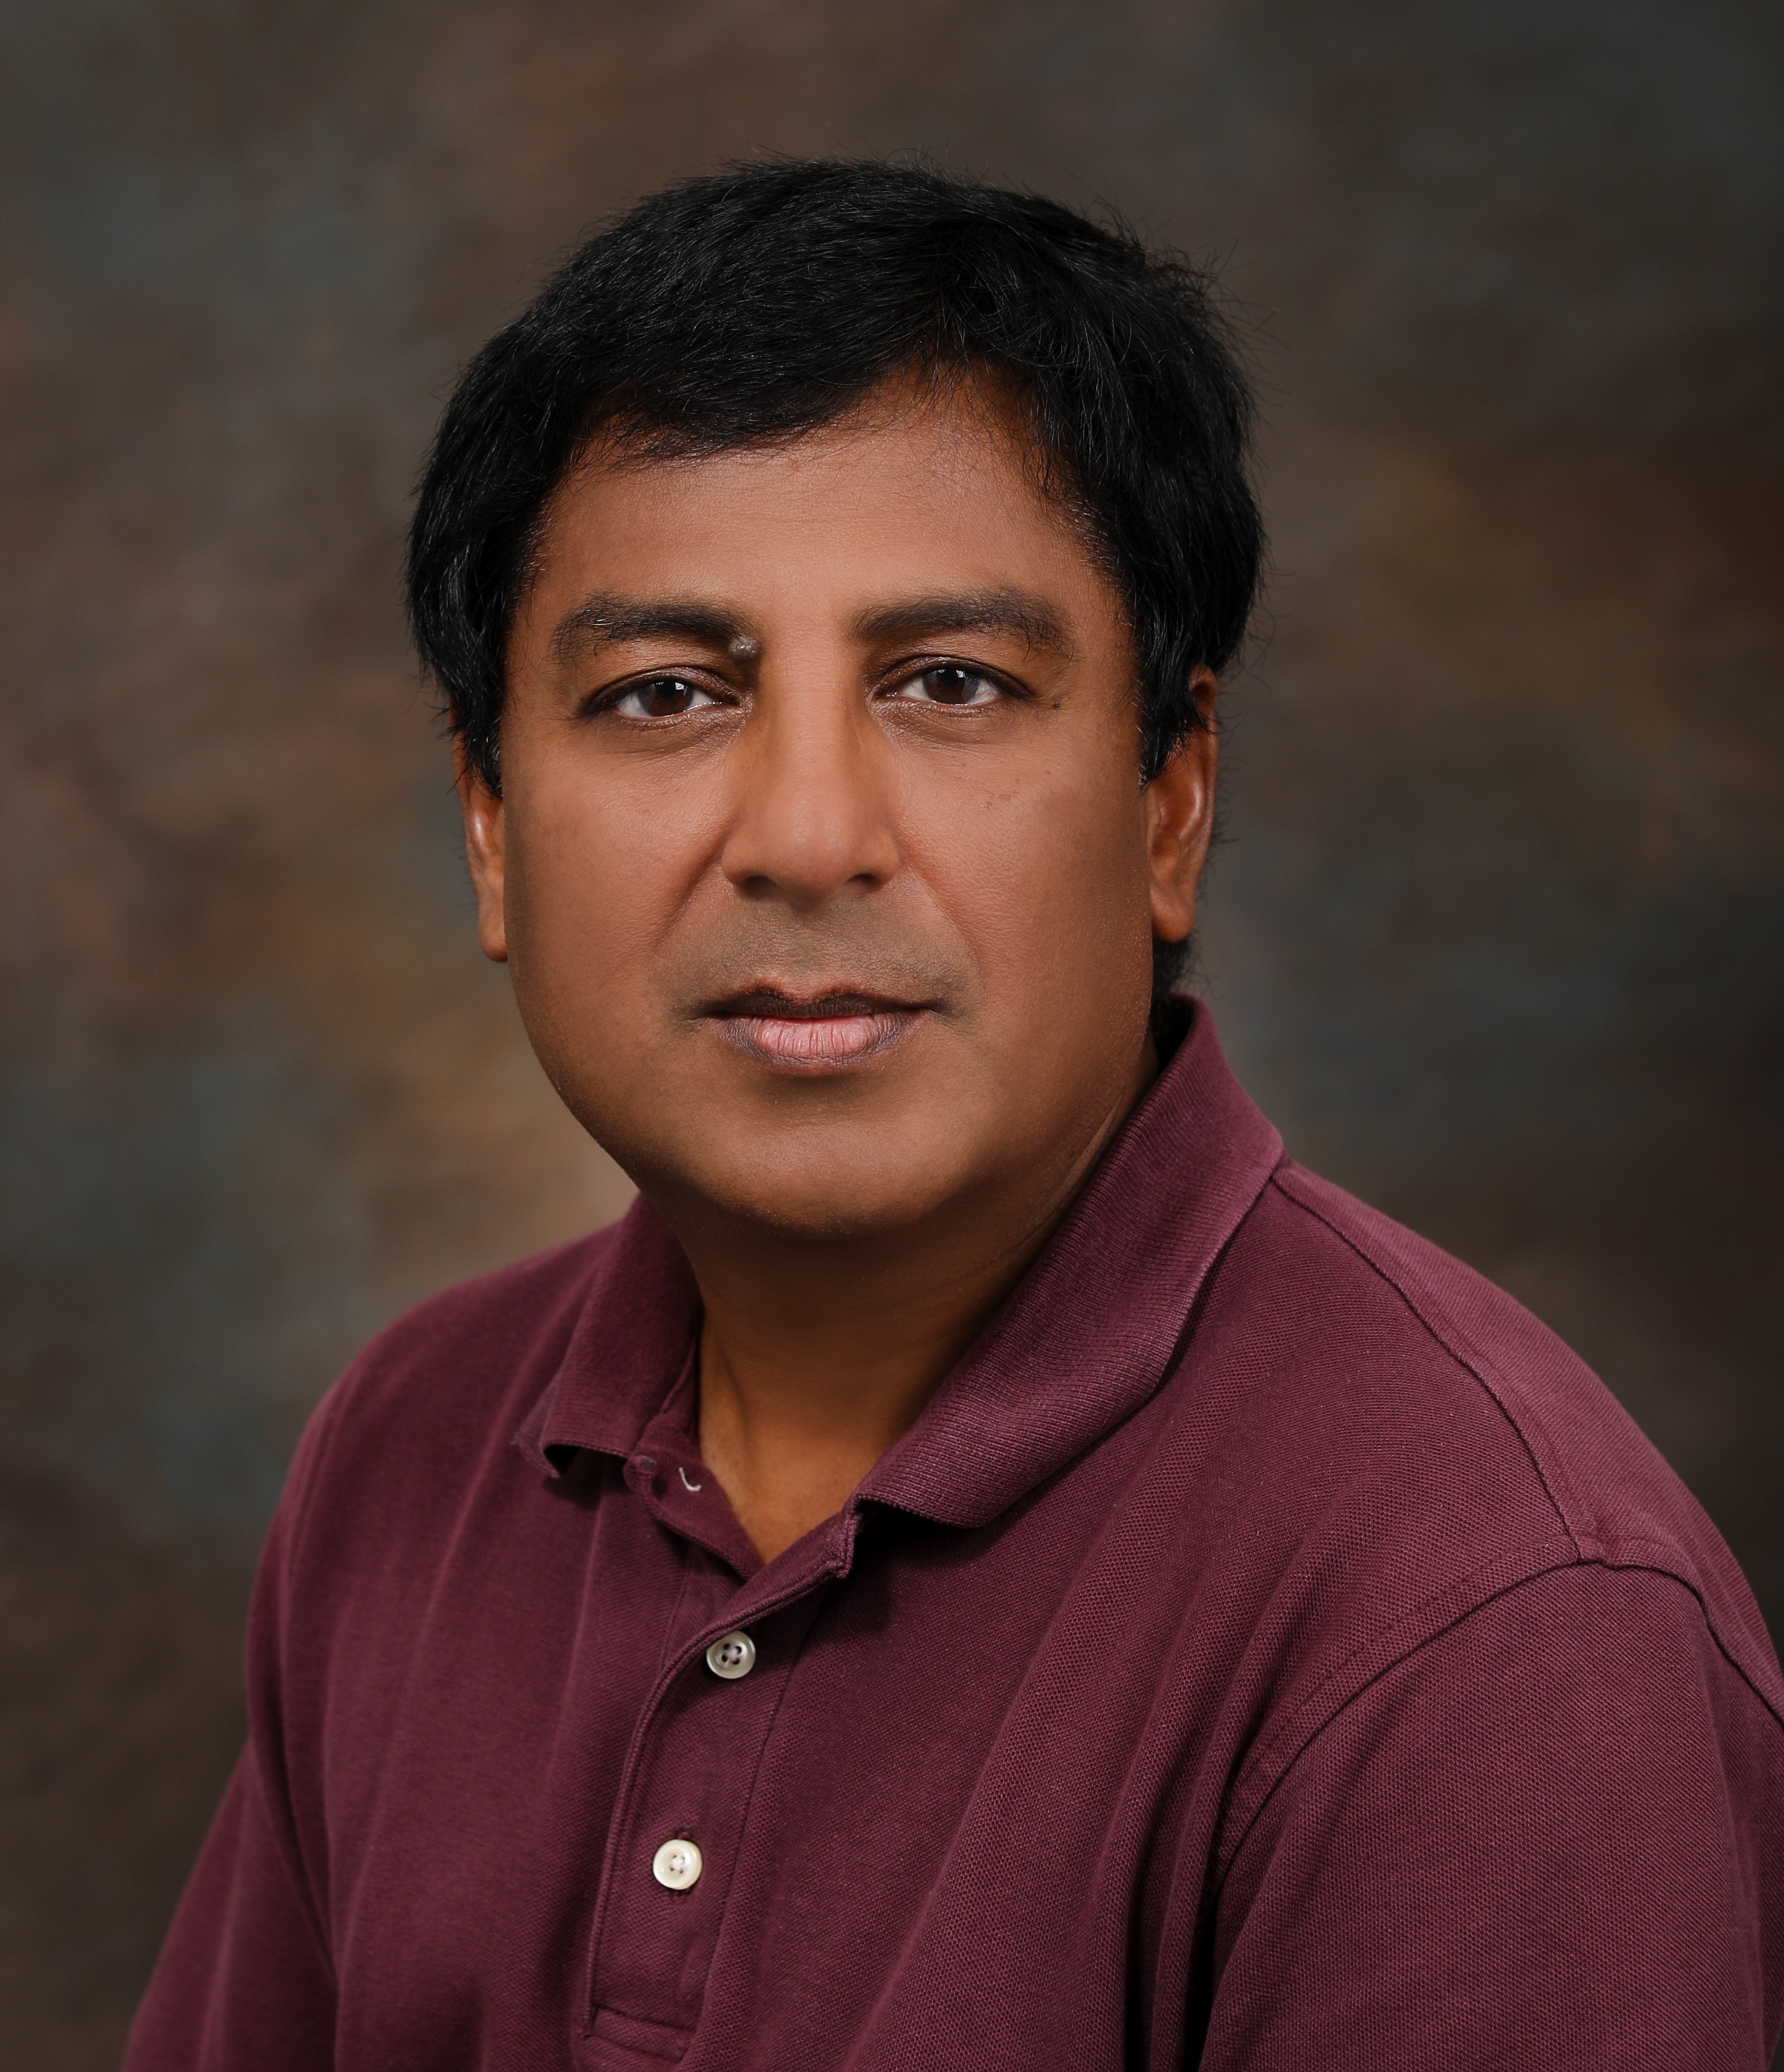 Profile picture of Maleq Khan, Ph.D.